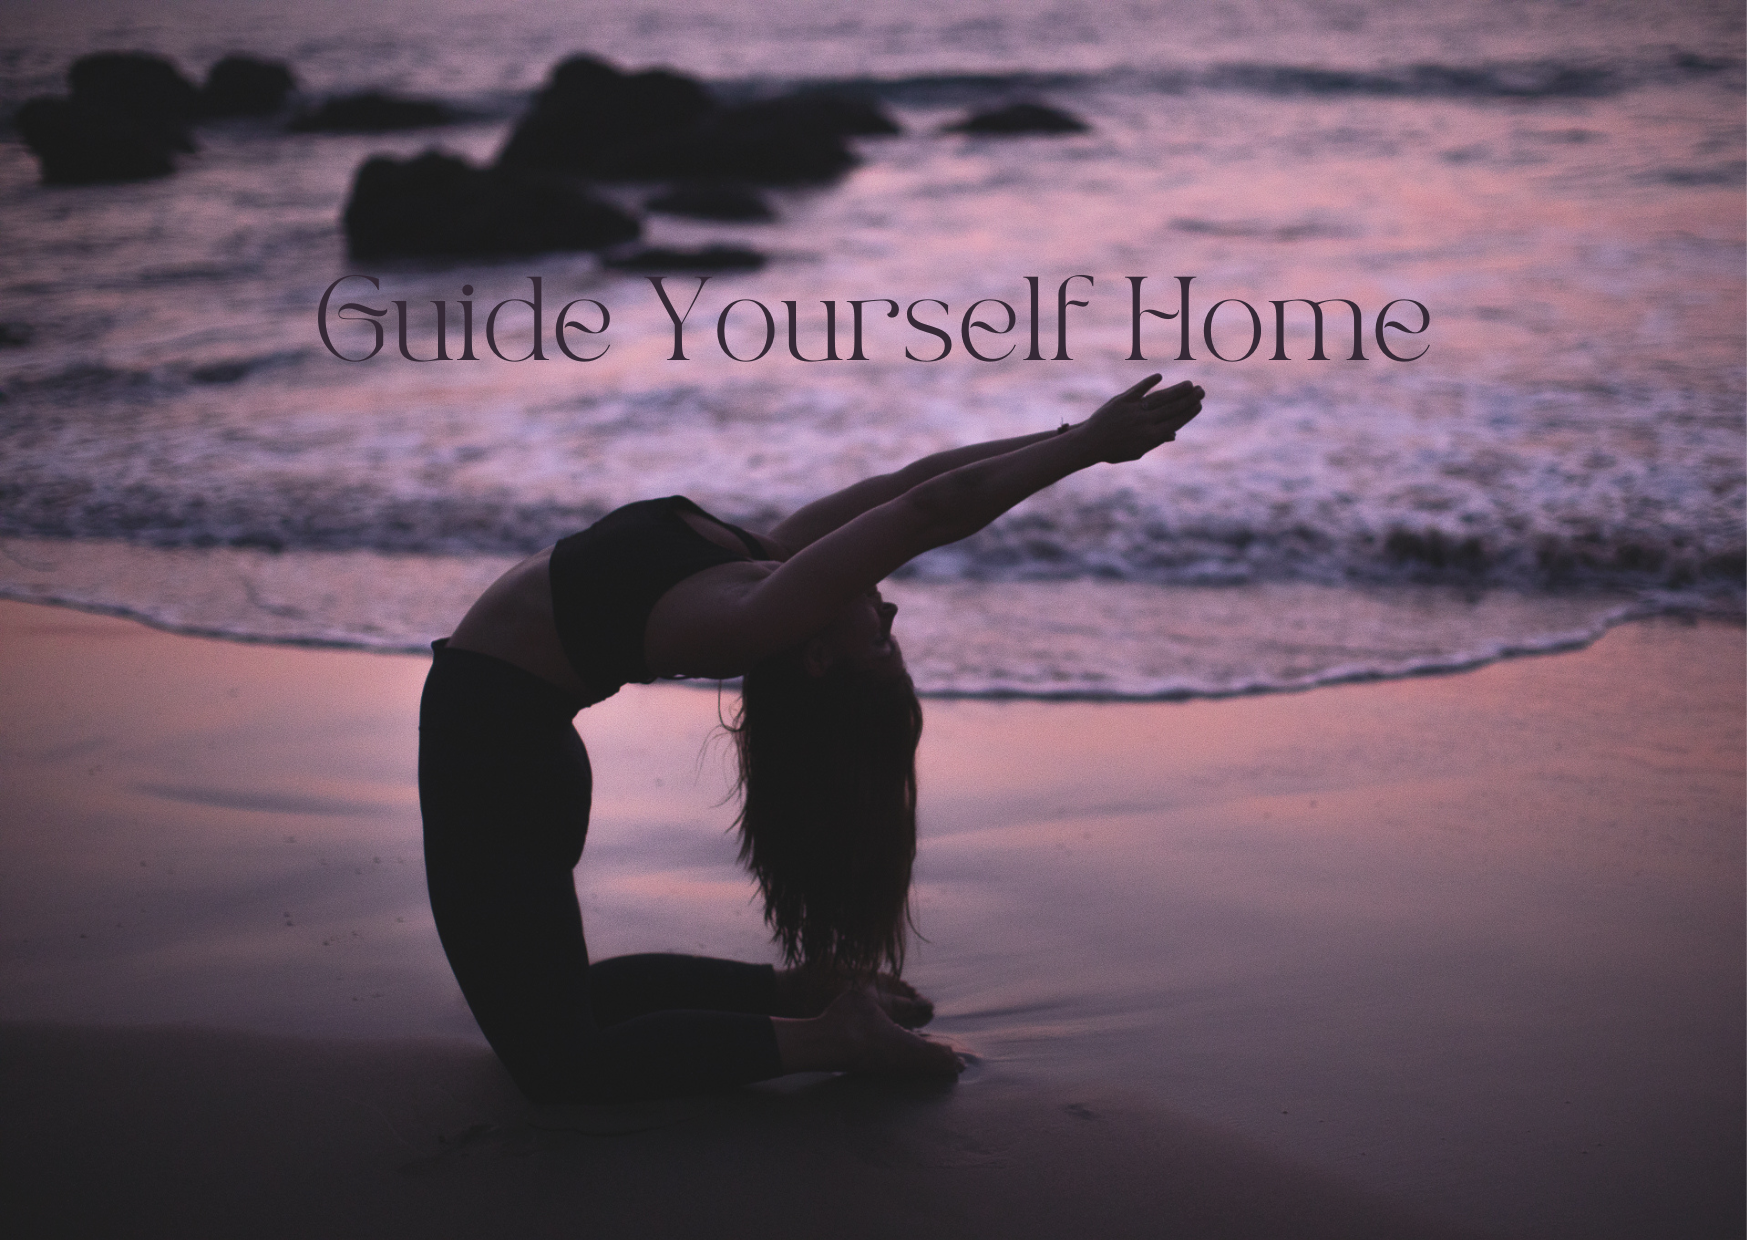 Gouide Yourself Home